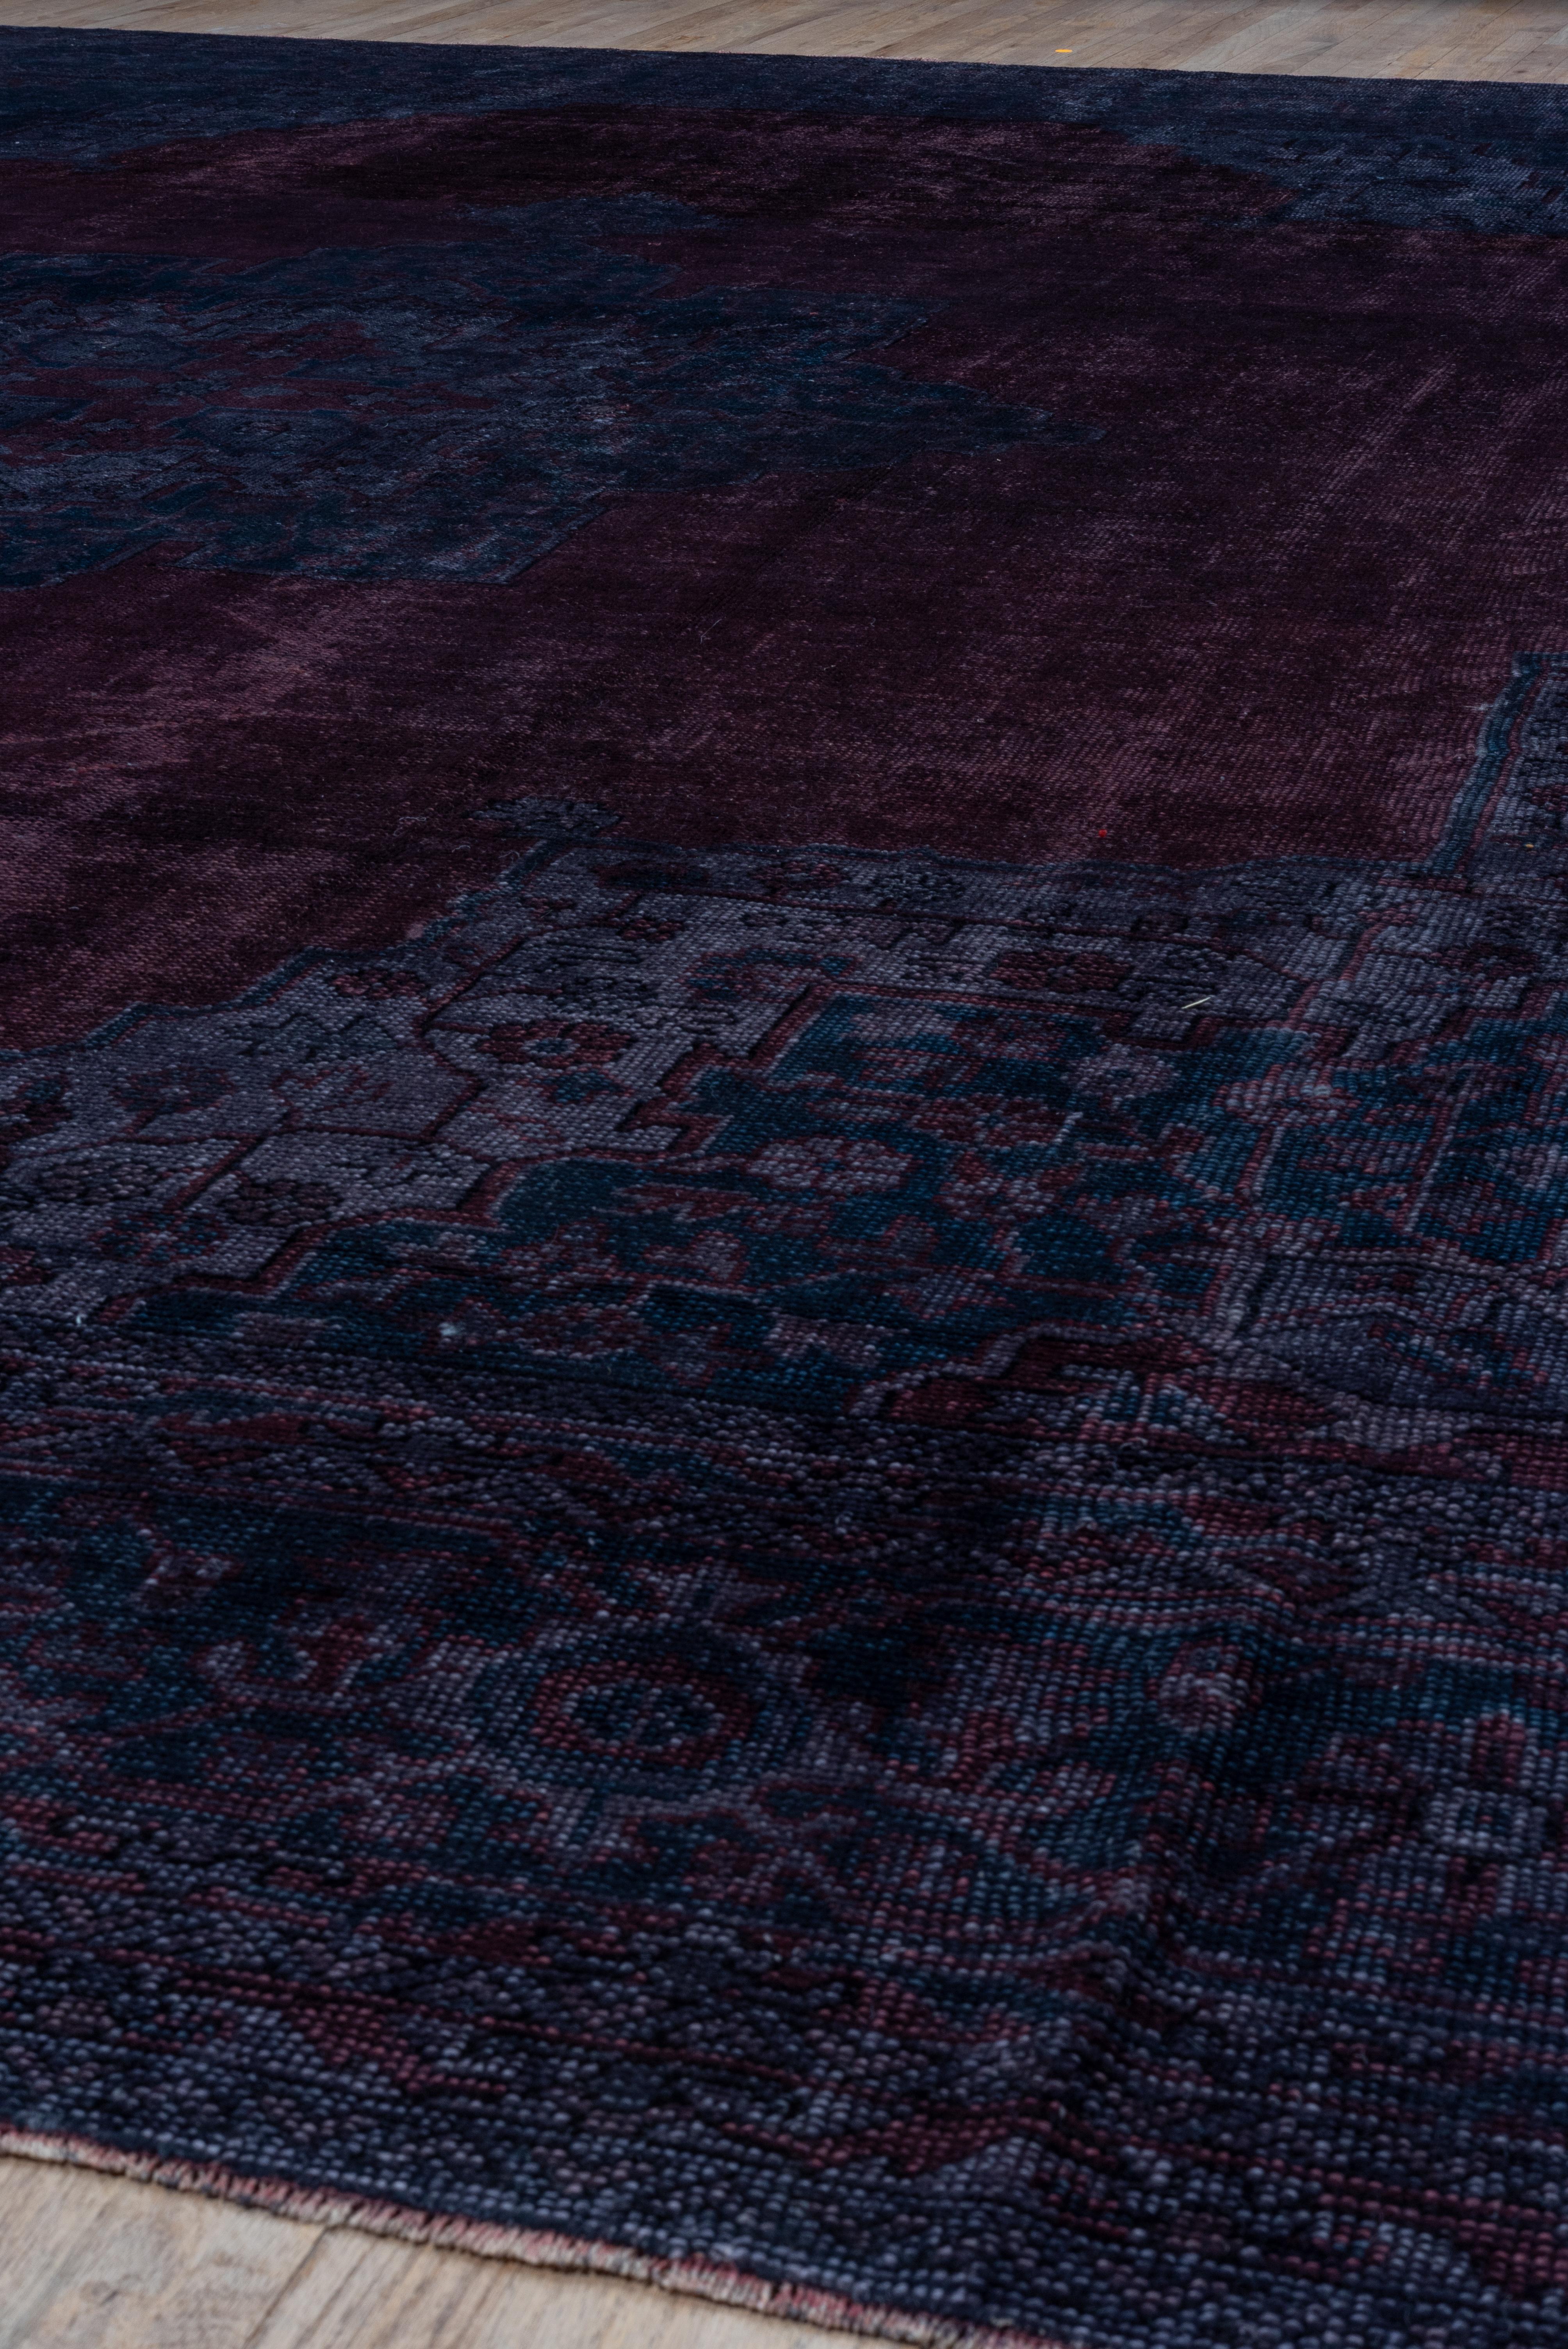 Turkish Fine Antique Oushak Rug, Ruby Red Field, Navy and Purple Outer Field and Borders